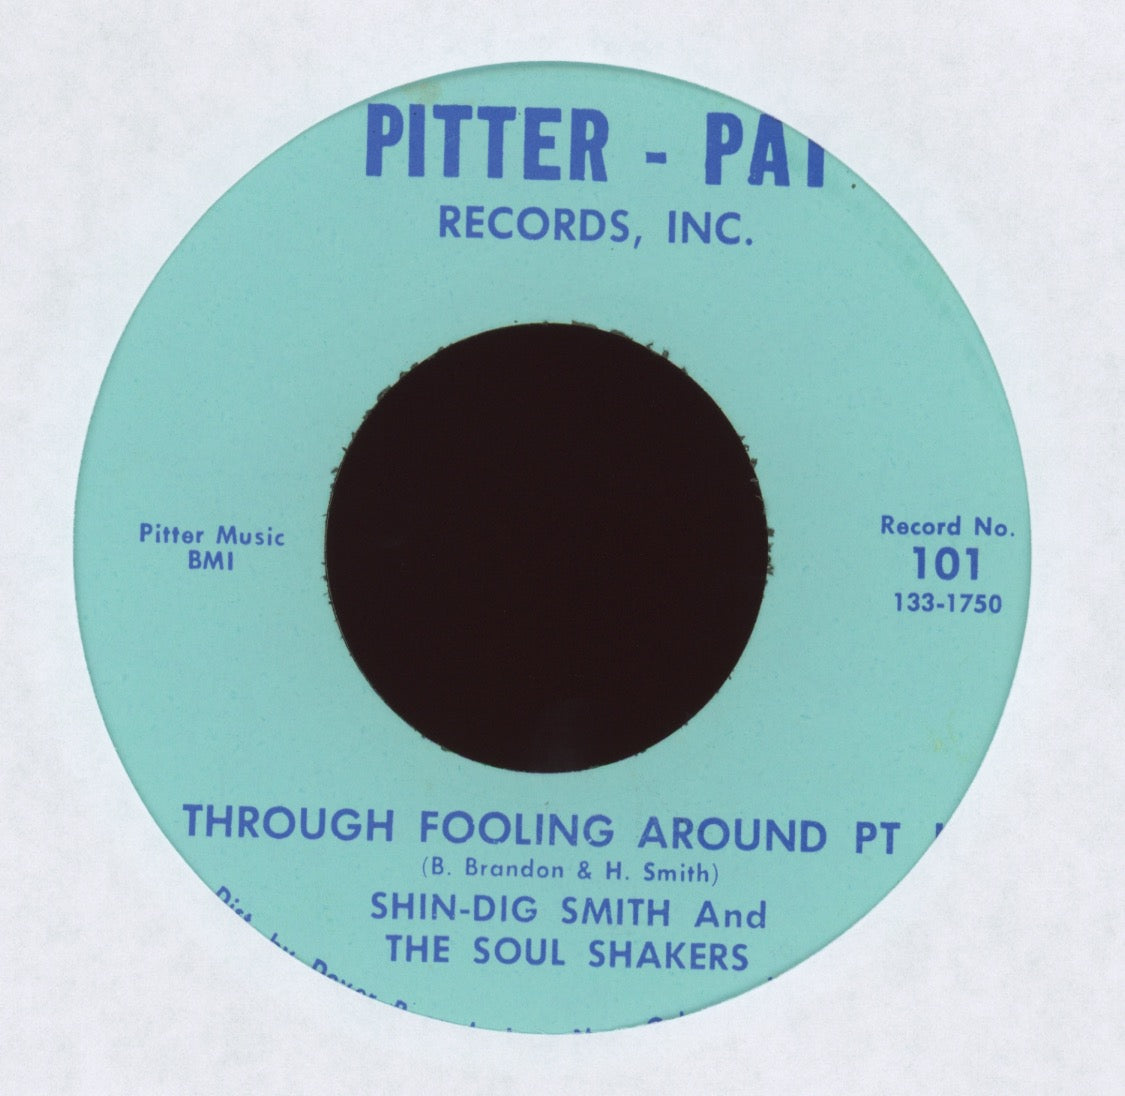 Shin-Dig Smith And The Soul Shakers - Through Fooling Around Pt. I / Pt. II on Pitter-Pat